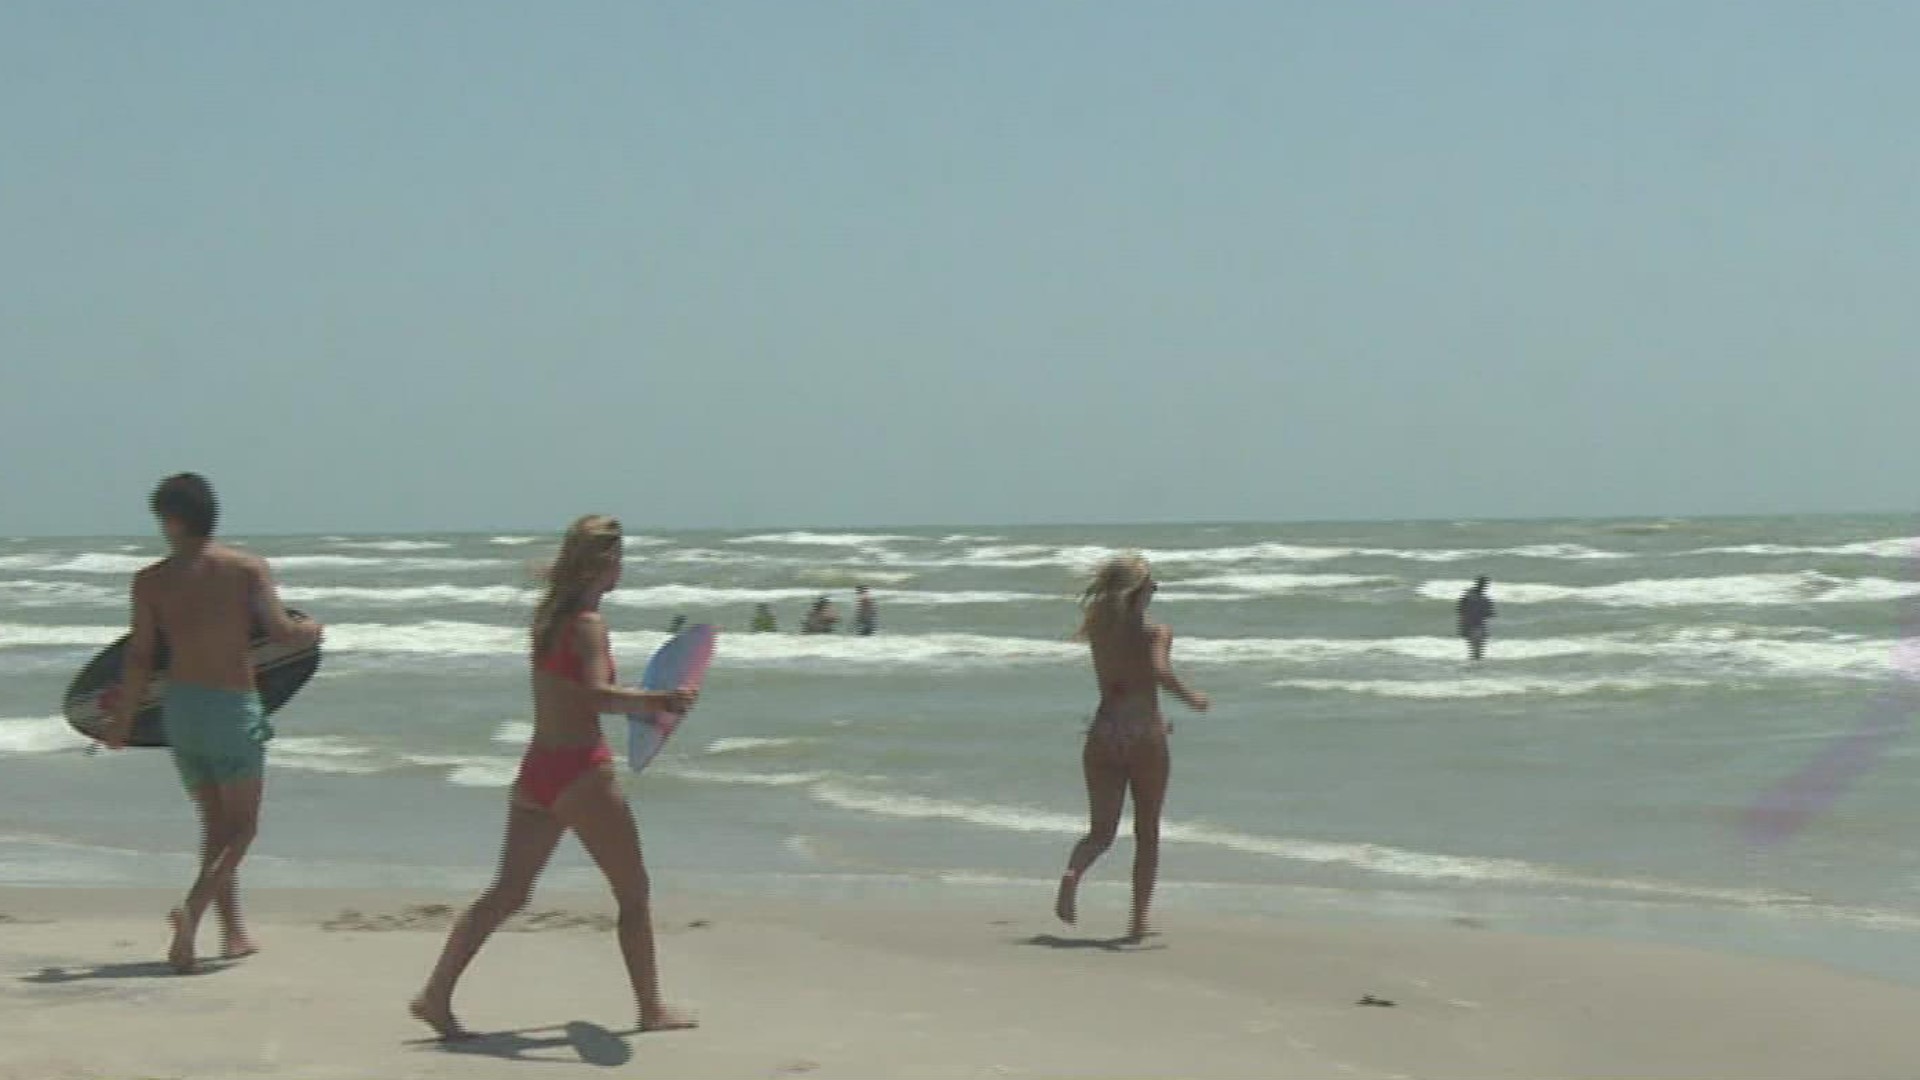 Non-profit Surfrider Foundation listed Corpus Christi as becoming "un-surfable."